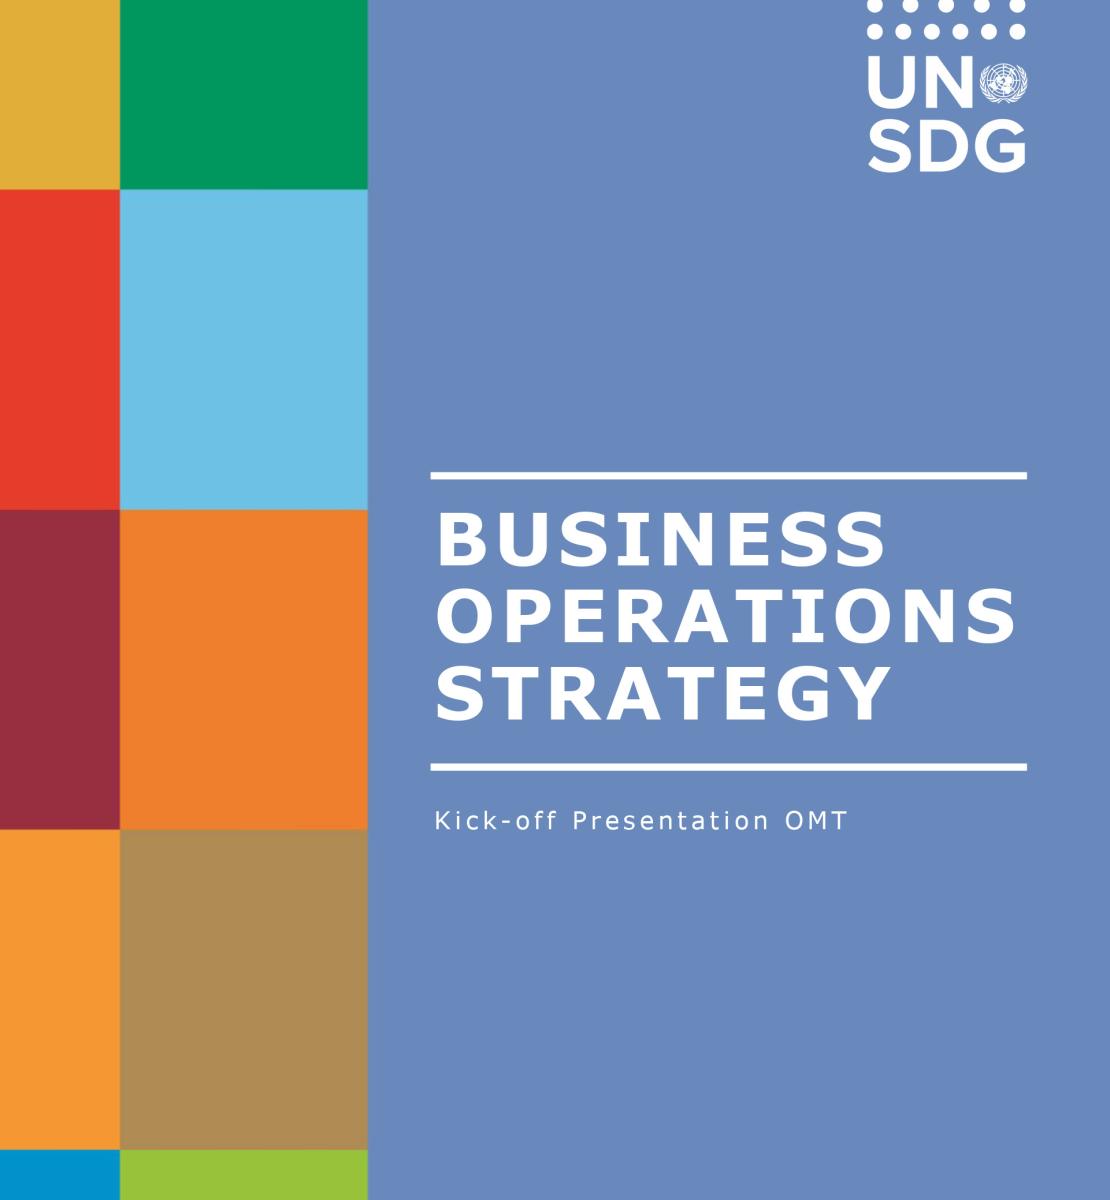 Business Operations Strategy presentation cover showing colourful tiles on the left and a solid blue background on the right.